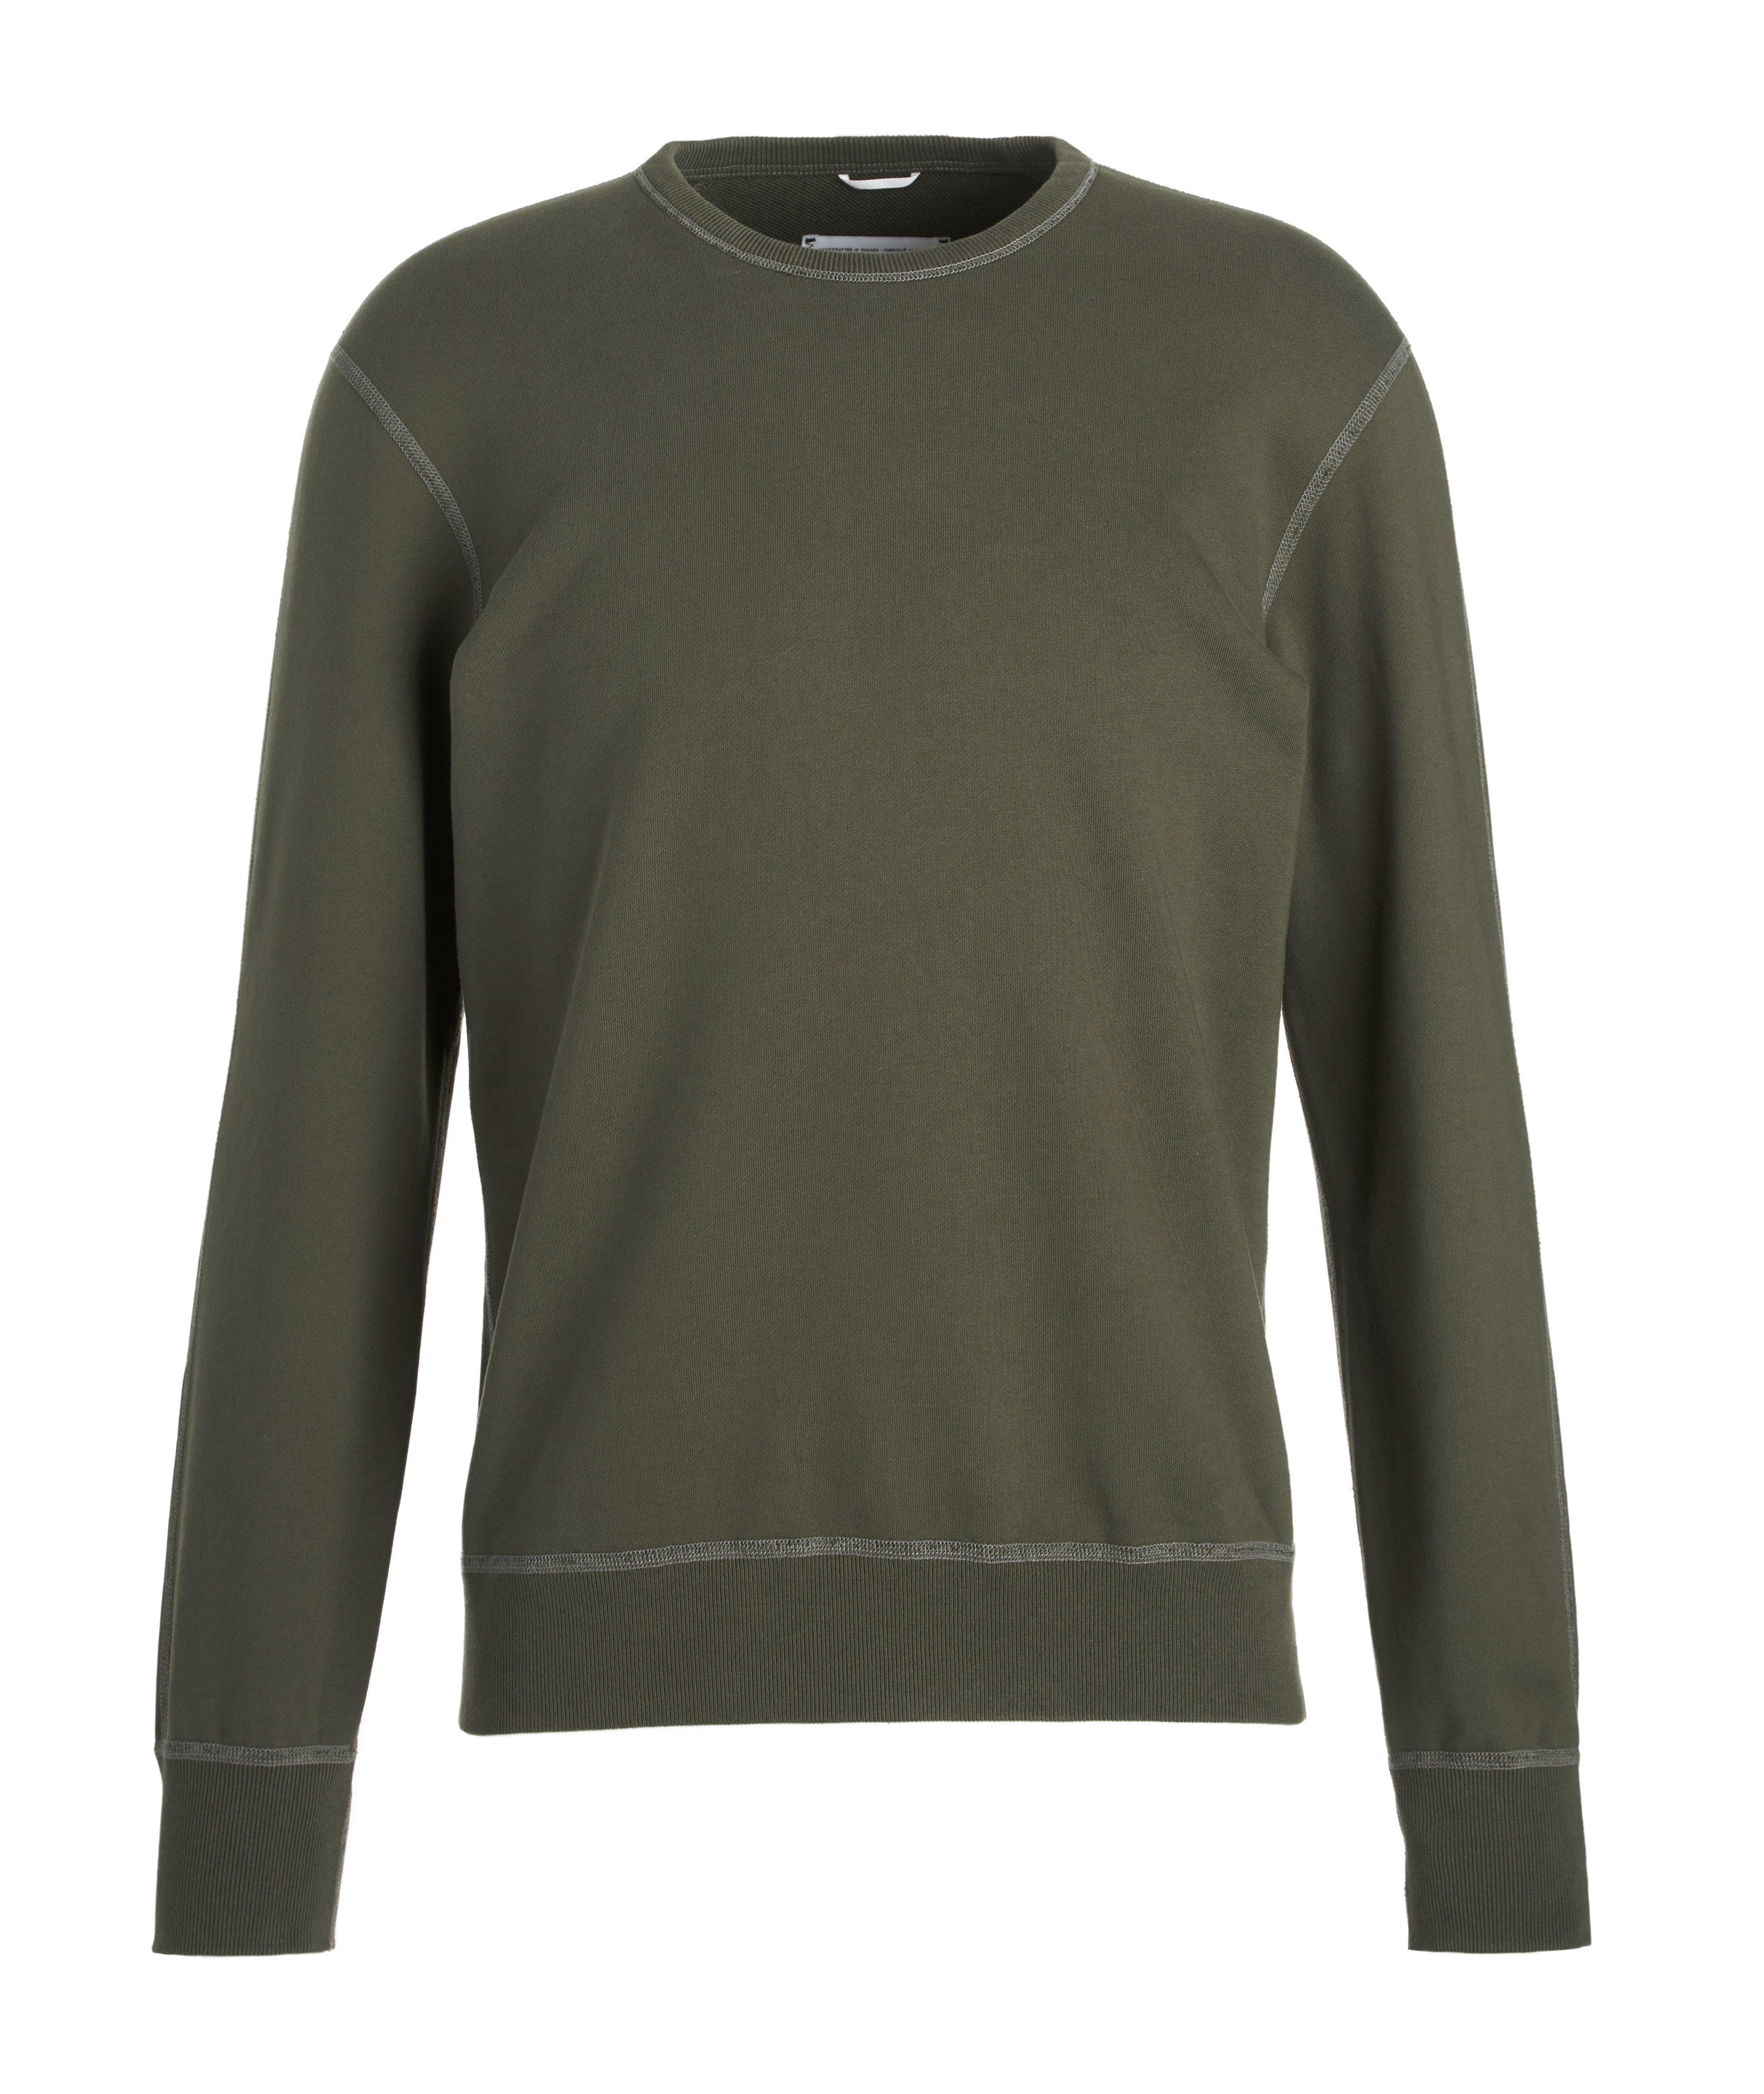 Midweight Terry Cotton Crew Neck Sweater image 0